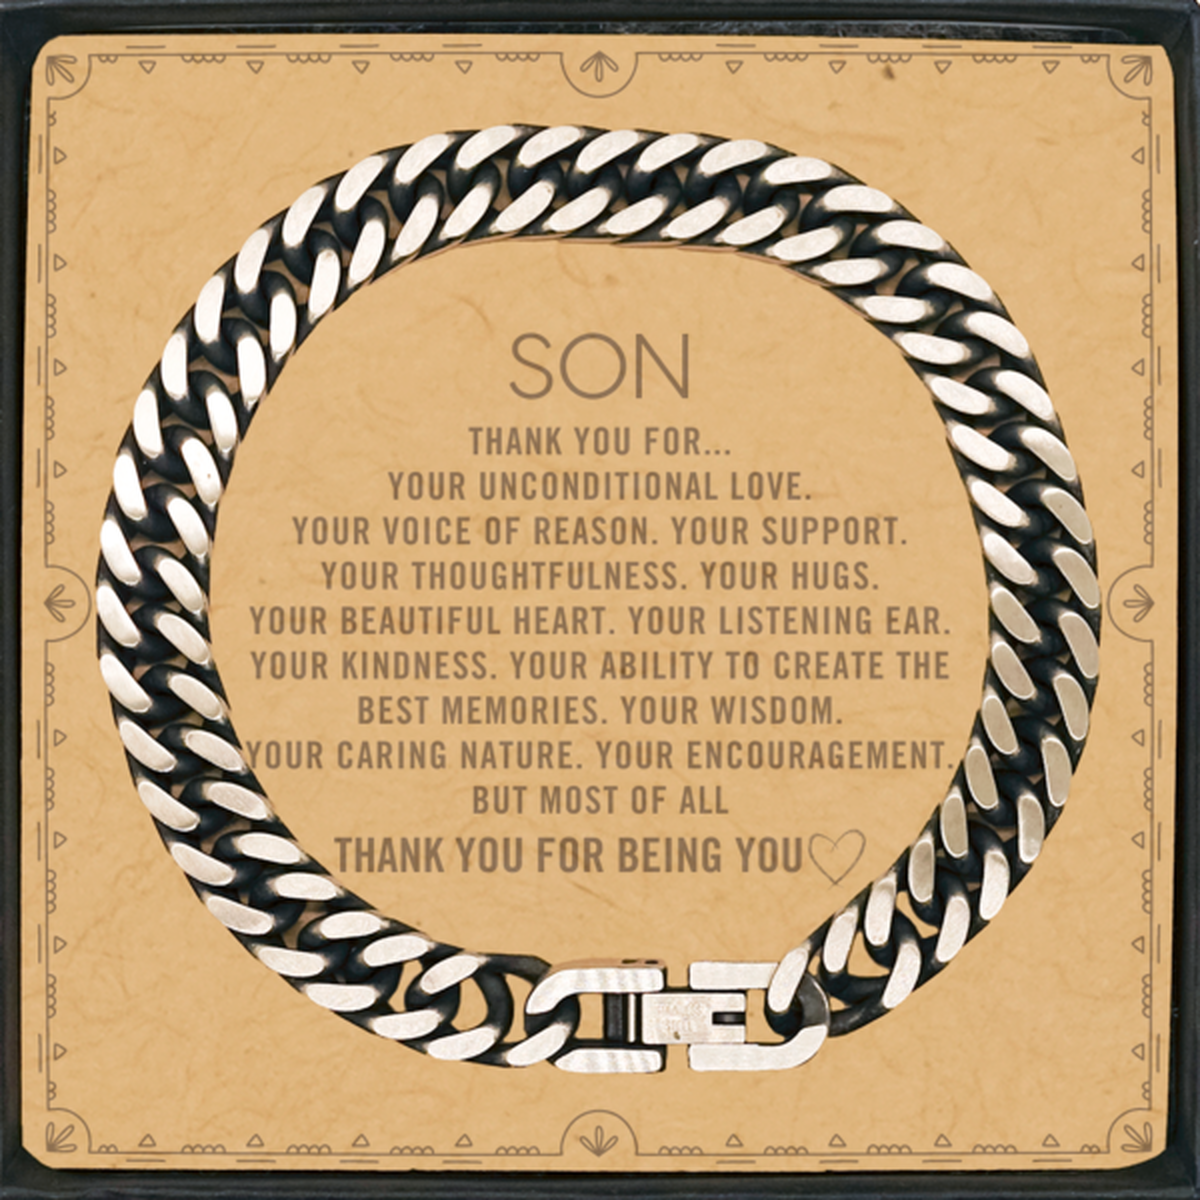 Son Cuban Link Chain Bracelet Custom, Message Card Gifts For Son Christmas Graduation Birthday Gifts for Men Women Son Thank you for Your unconditional love